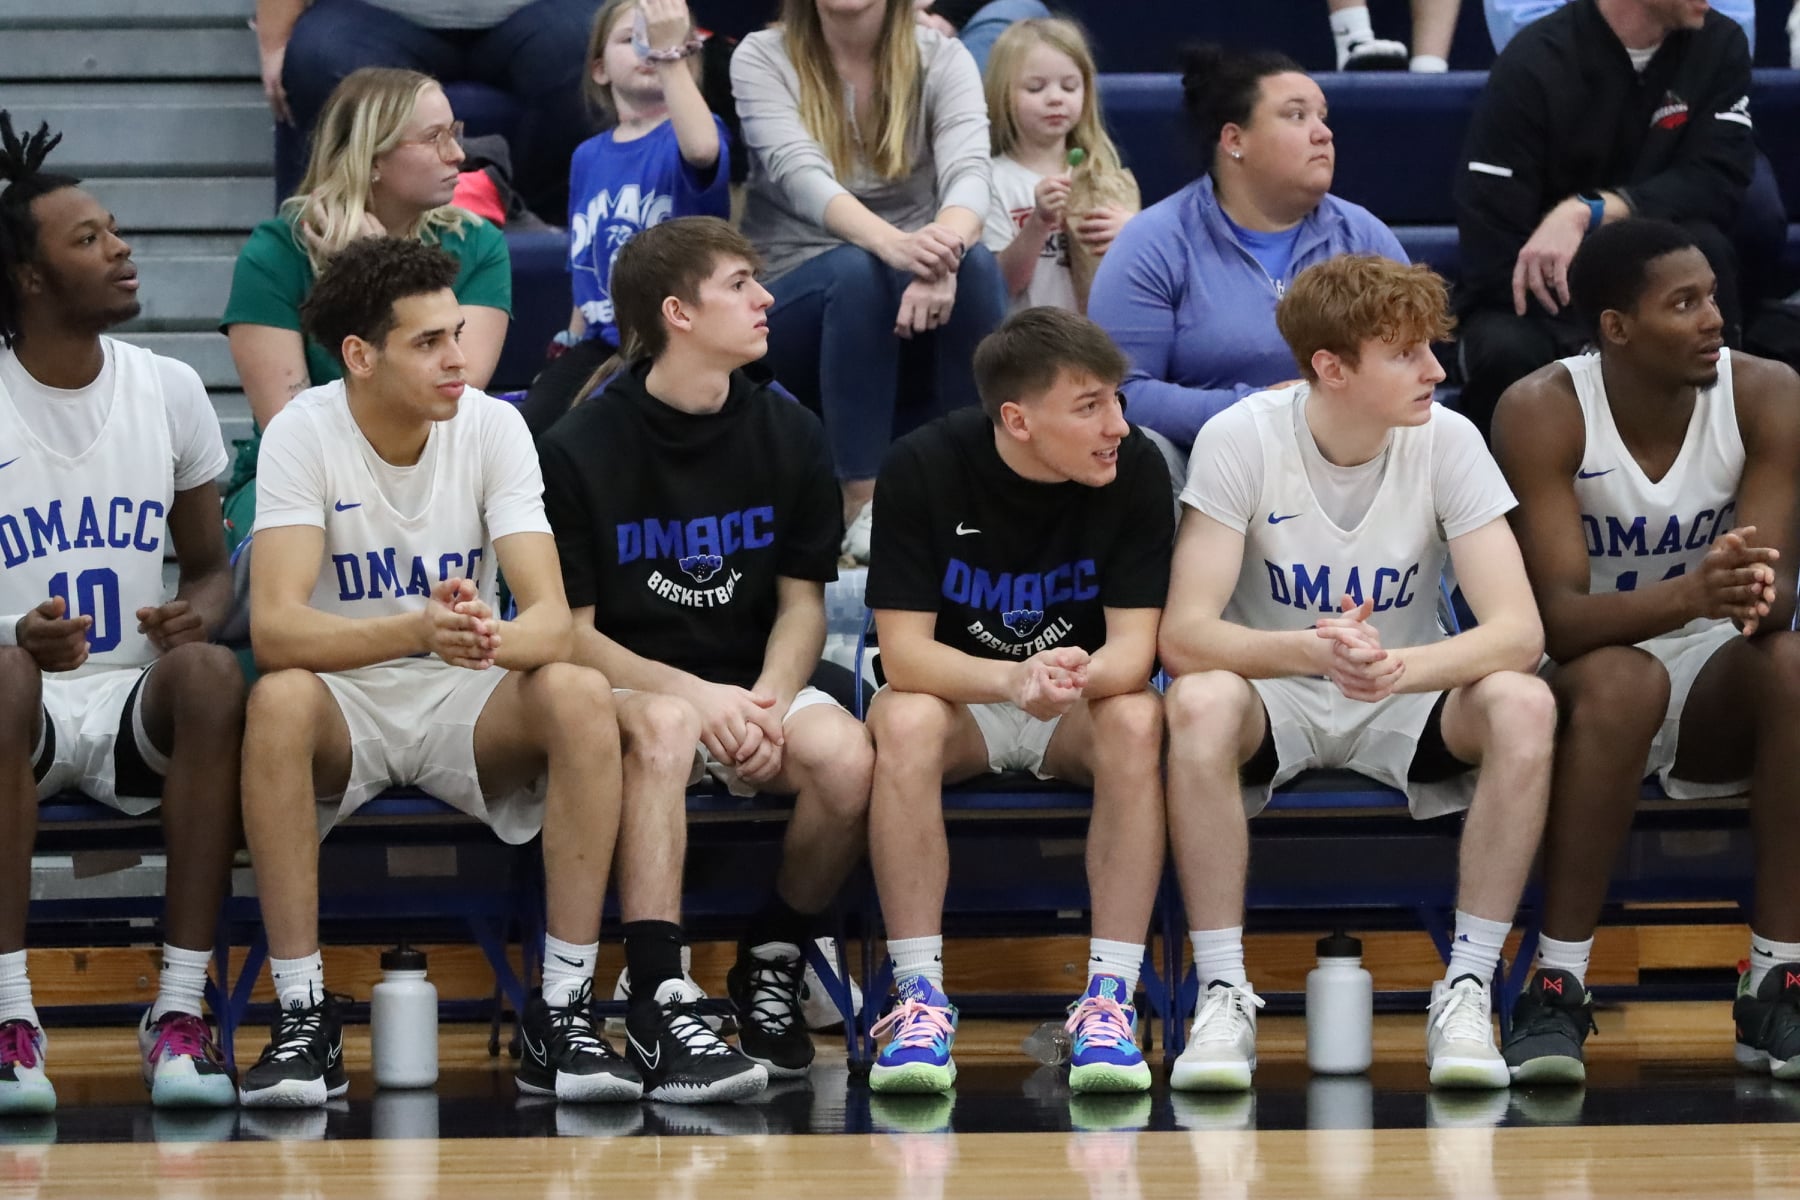 Graves scores 31 points to lead DMACC men's basketball team past NIACC, 115-79